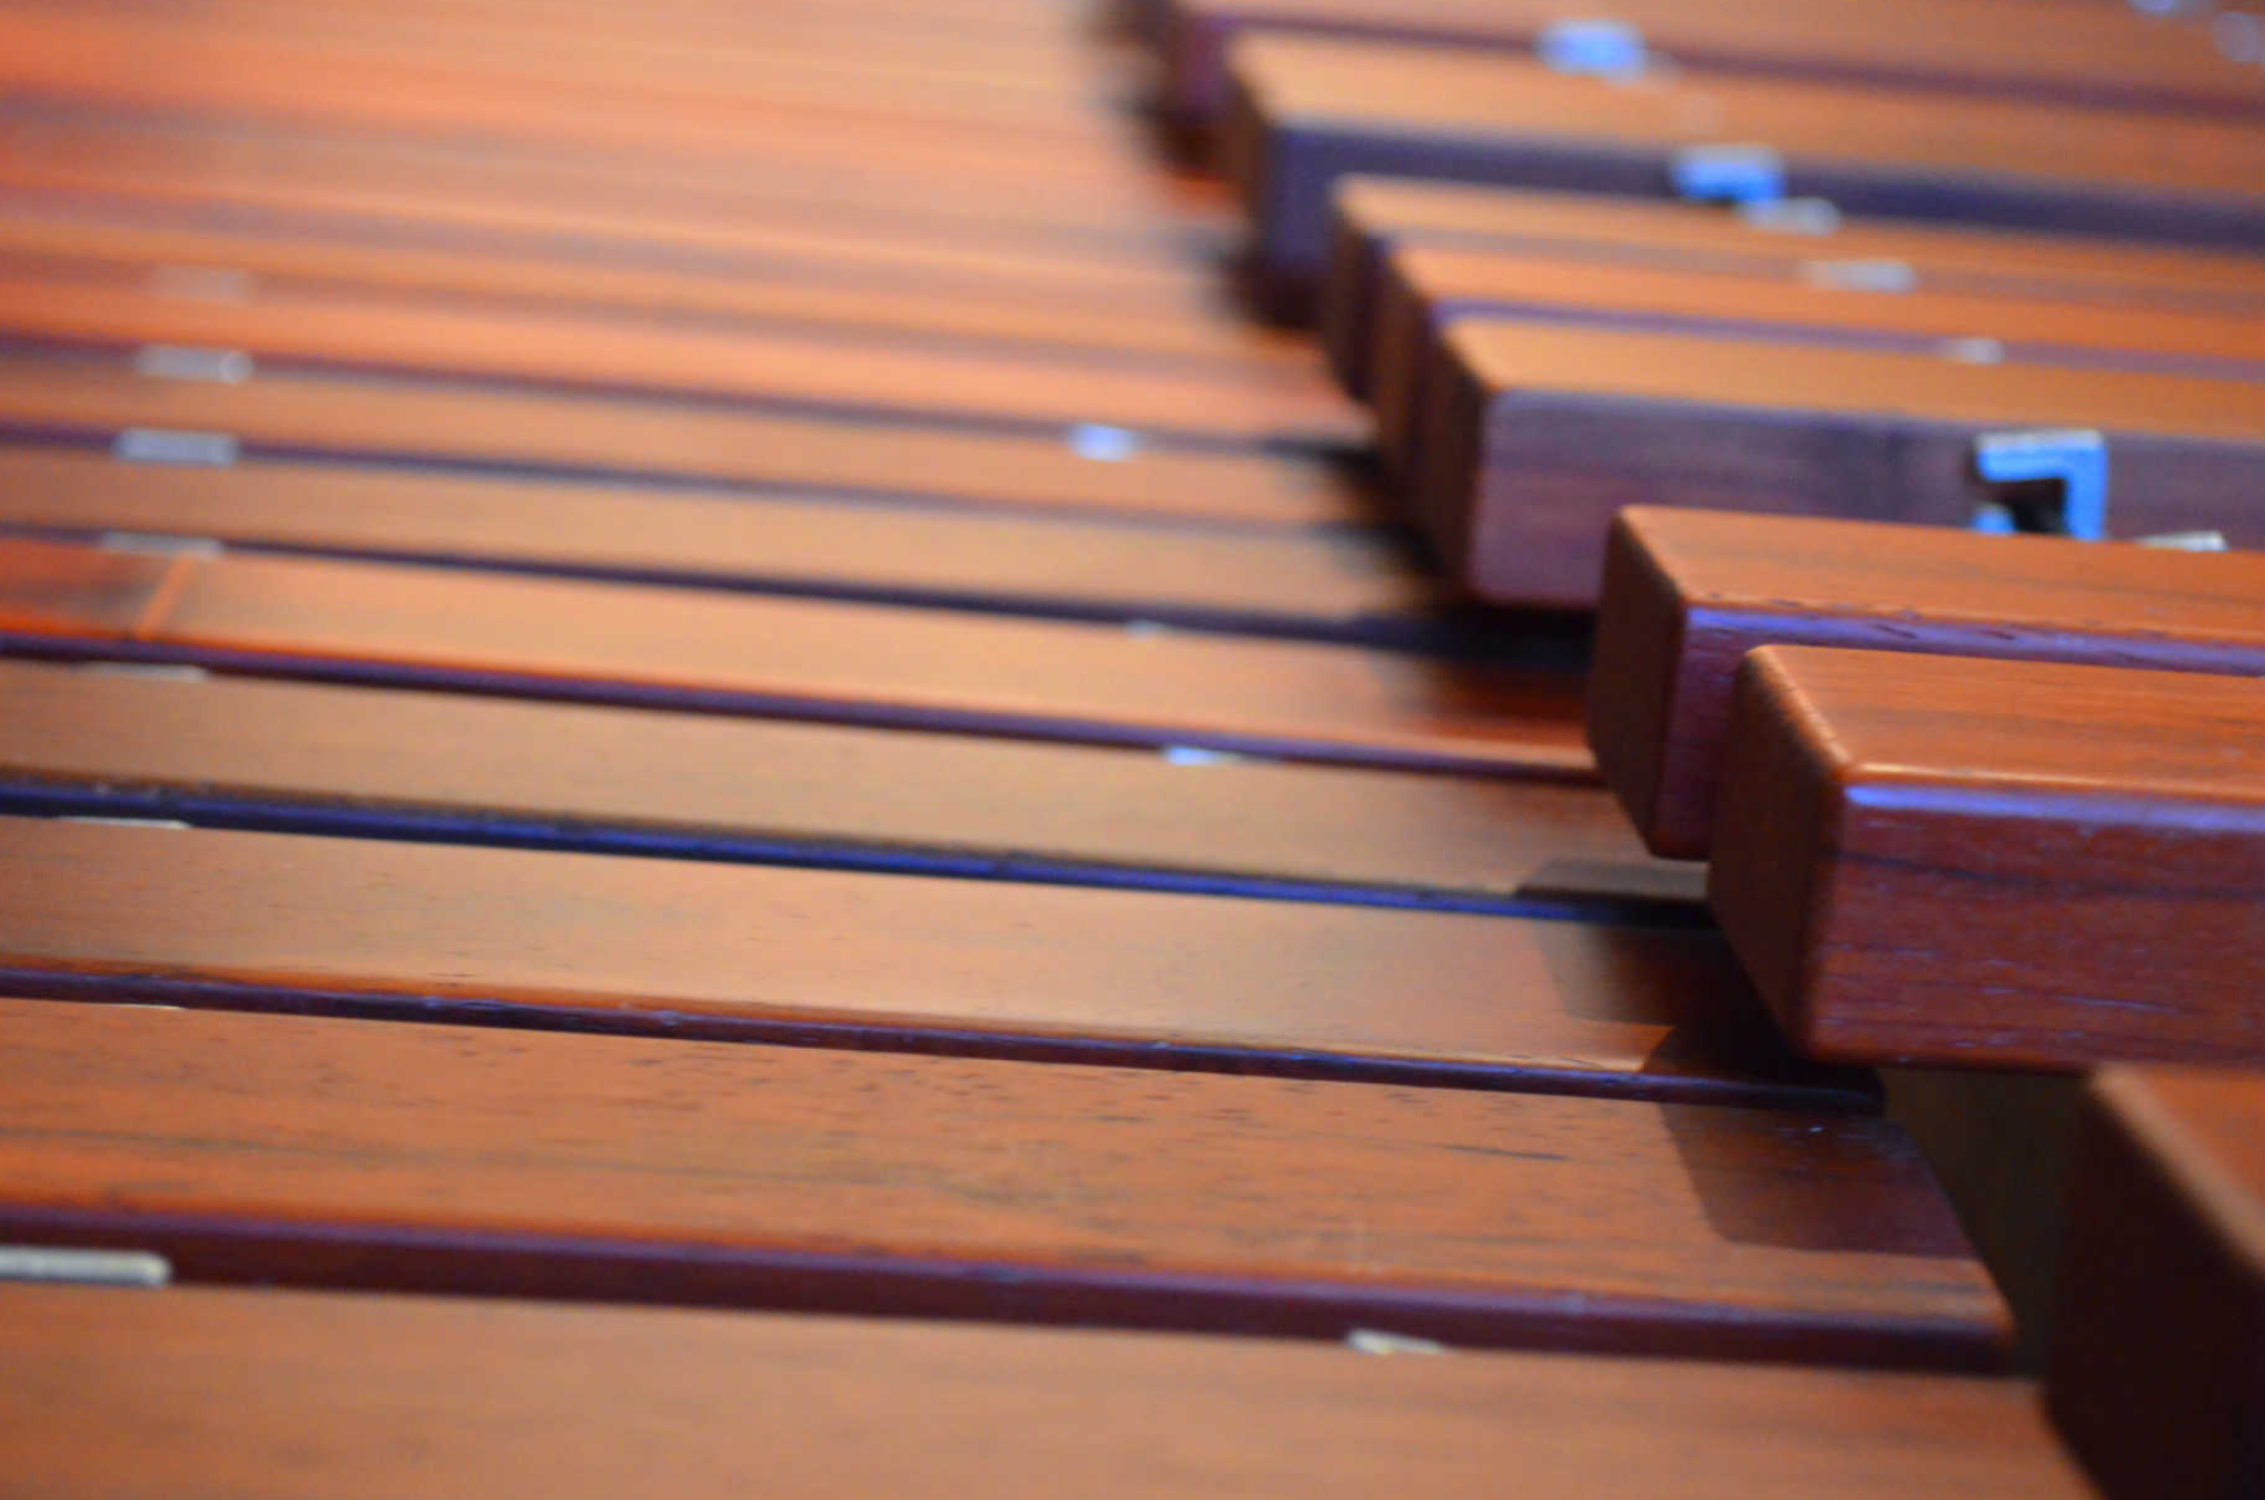 Xylophone: Marching Band of TURA Harksheide E.V., A Chromatic Instrument, High Pitch Range. 2270x1500 HD Wallpaper.